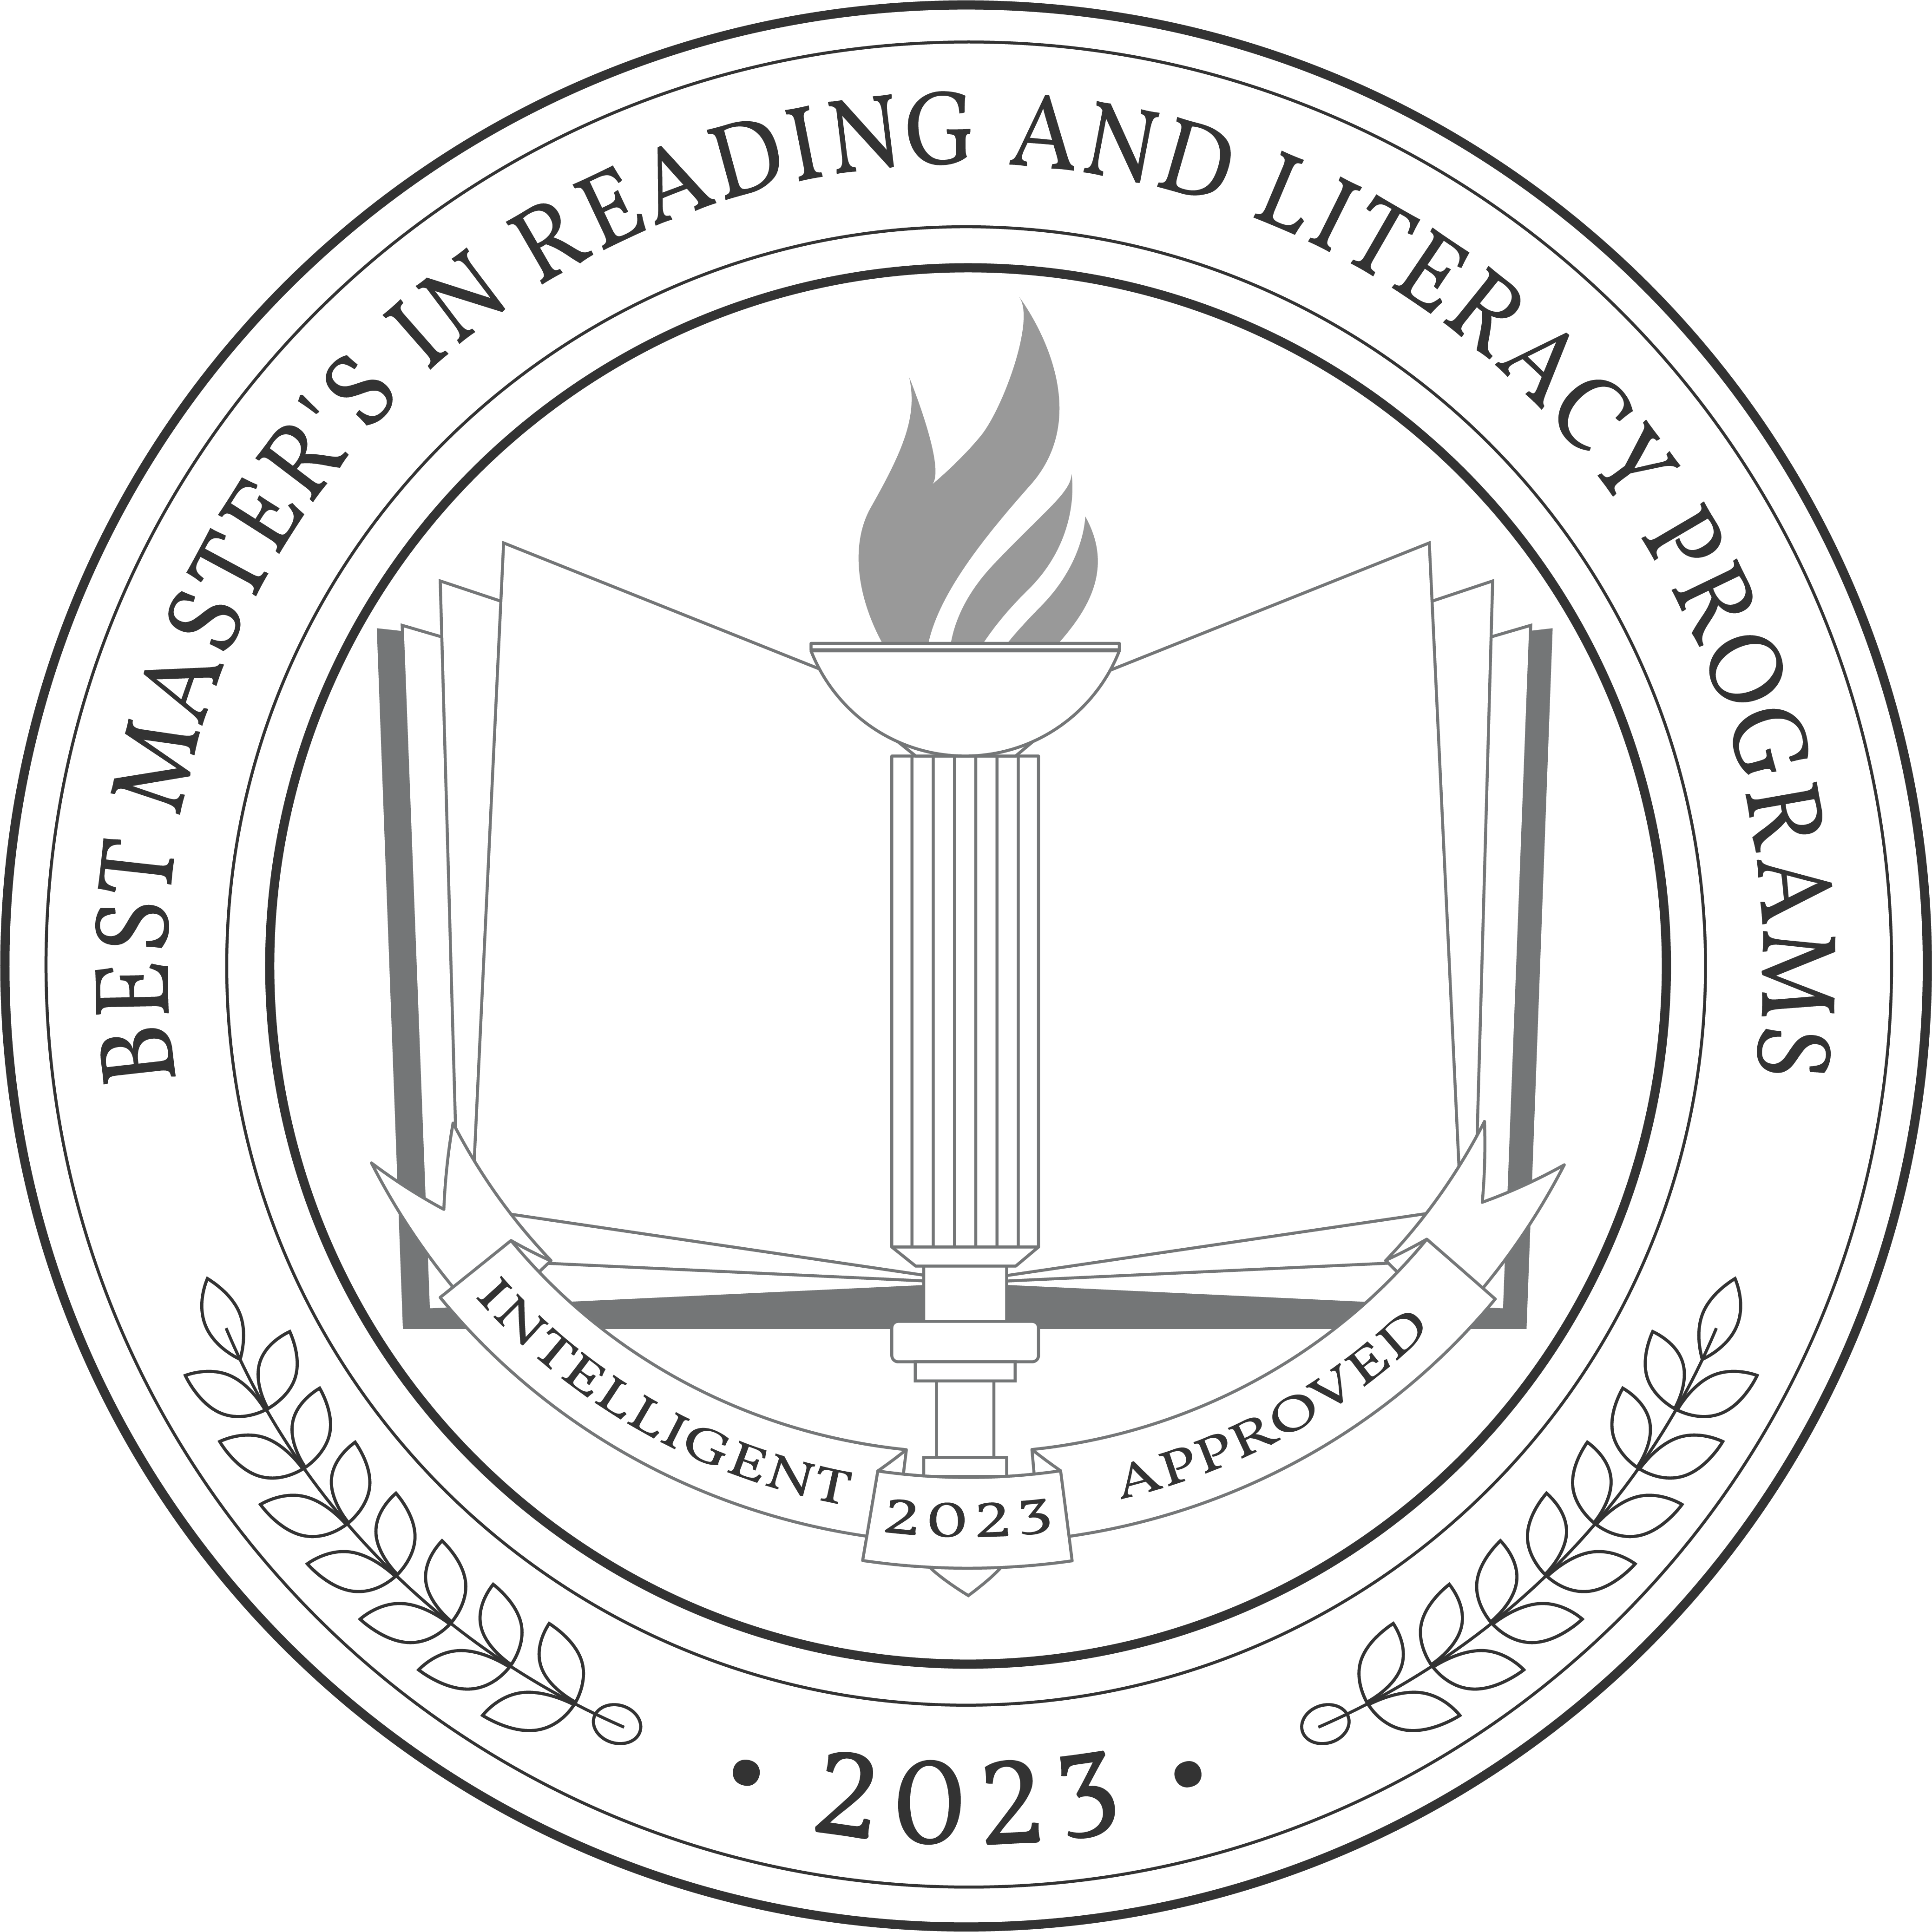 Best Master's in Reading And Literacy Programs badge